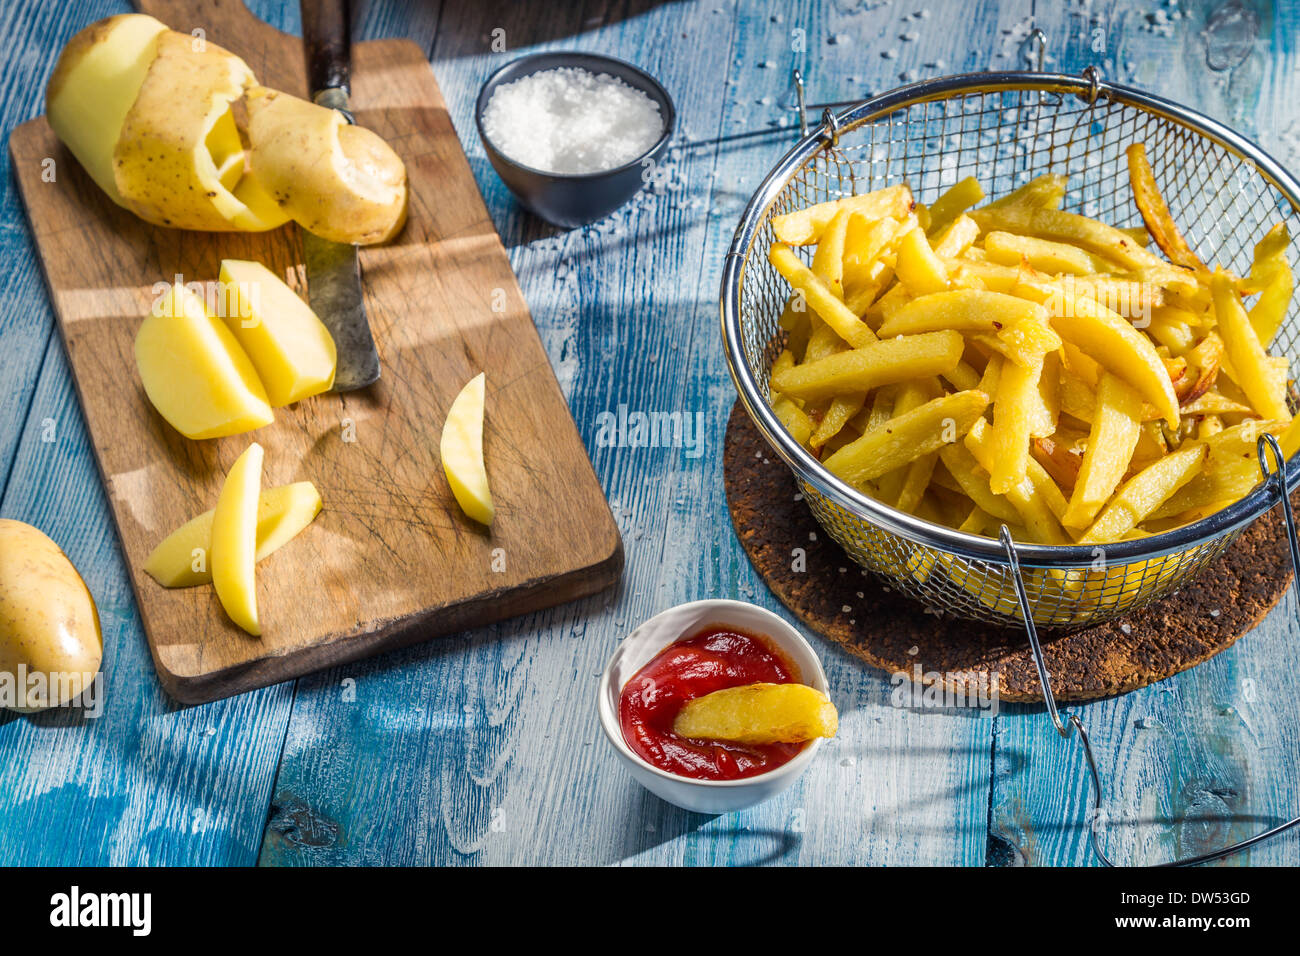 French fries made from potatoes Stock Photo